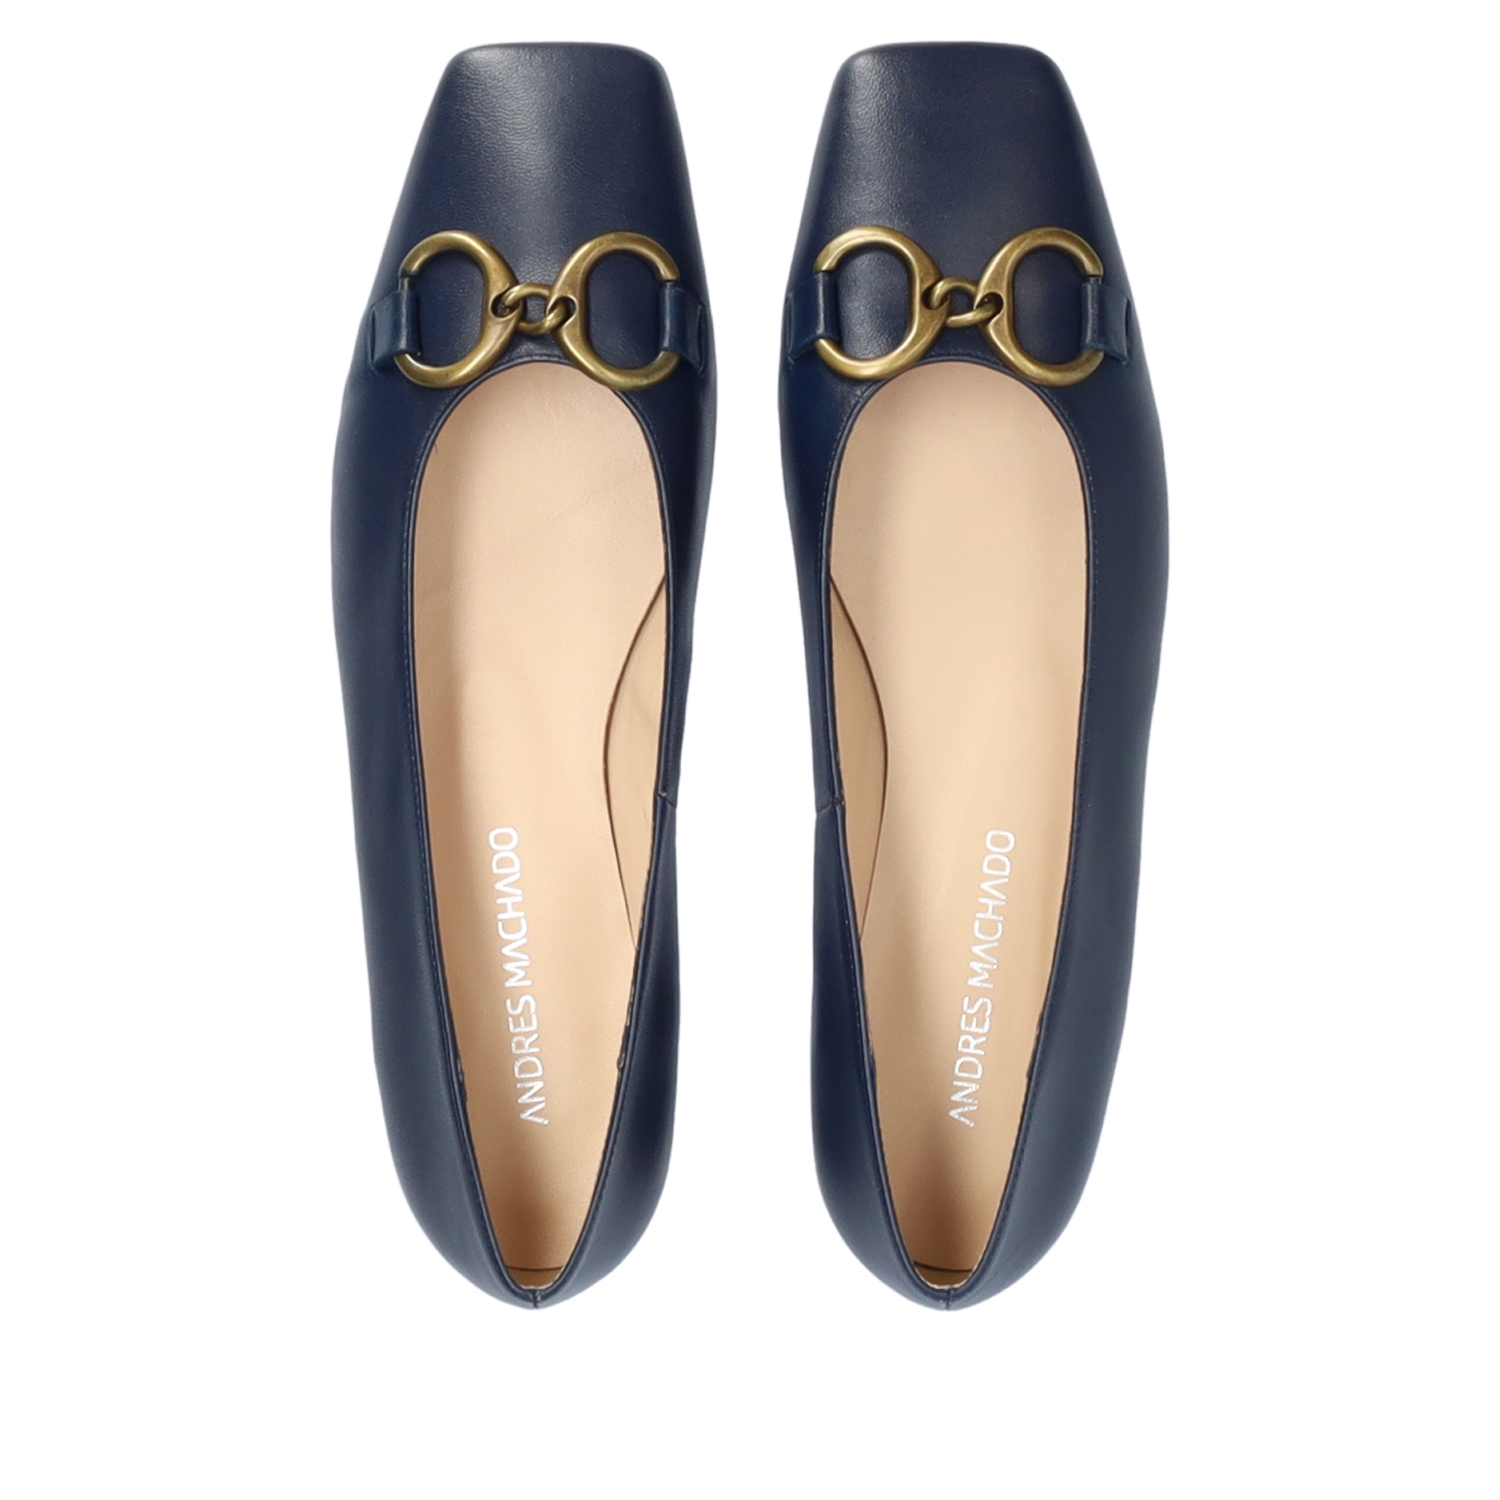 Square toe ballerina flats in navy leather 